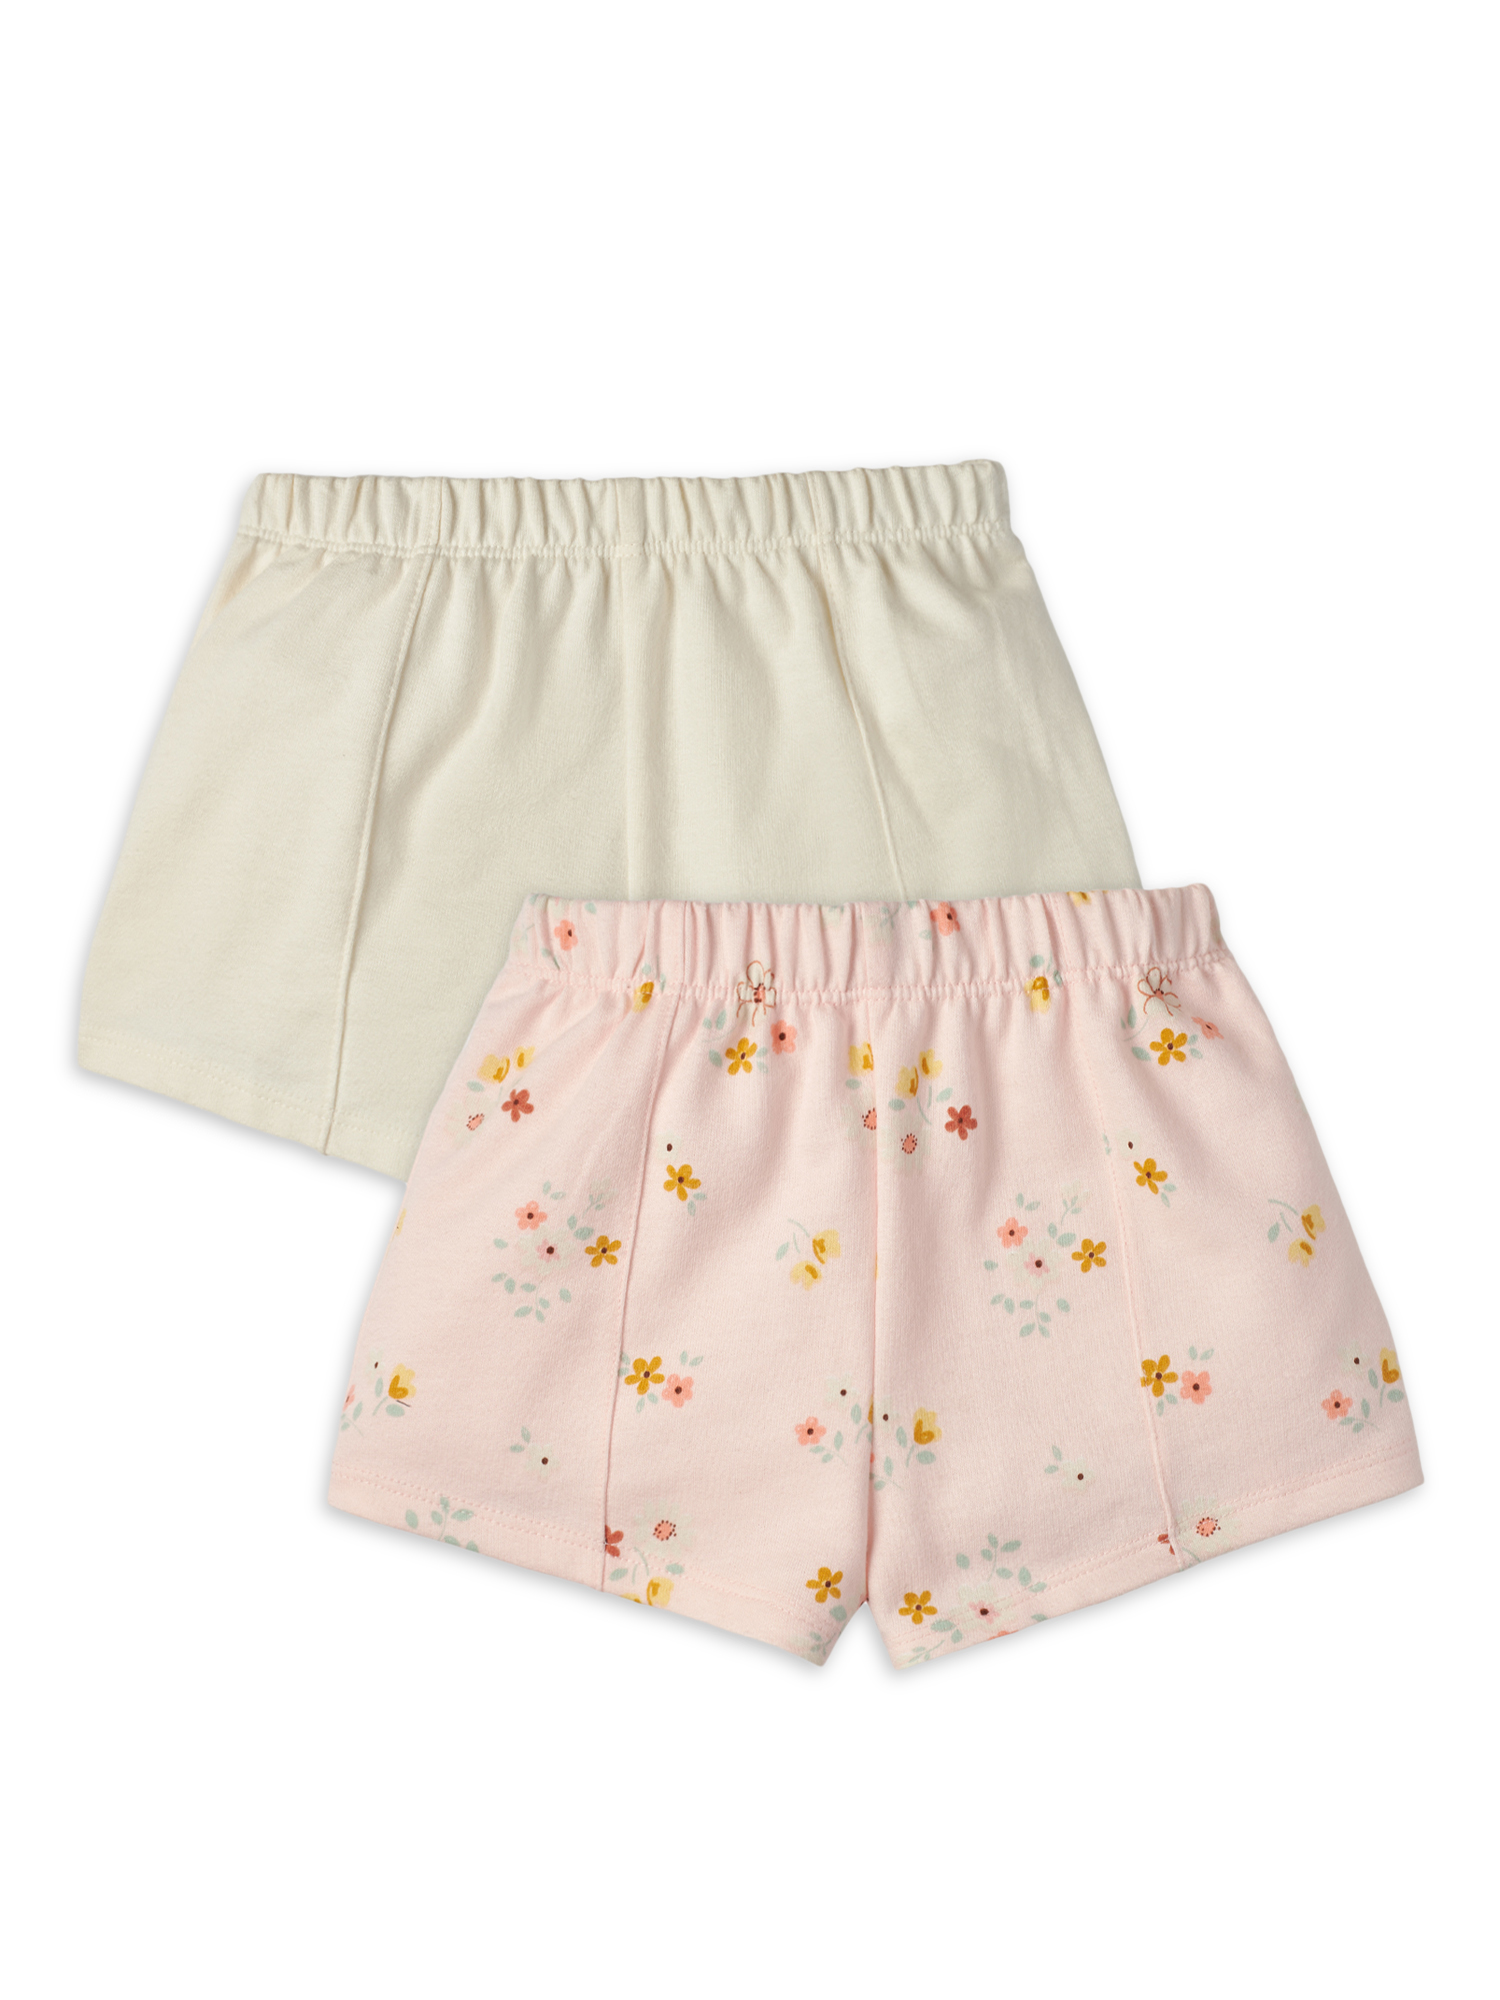 Modern Moments by Gerber Toddler Girl Peached French Terry Shorts, 2-Pack, Sizes 12M-5T - image 1 of 11